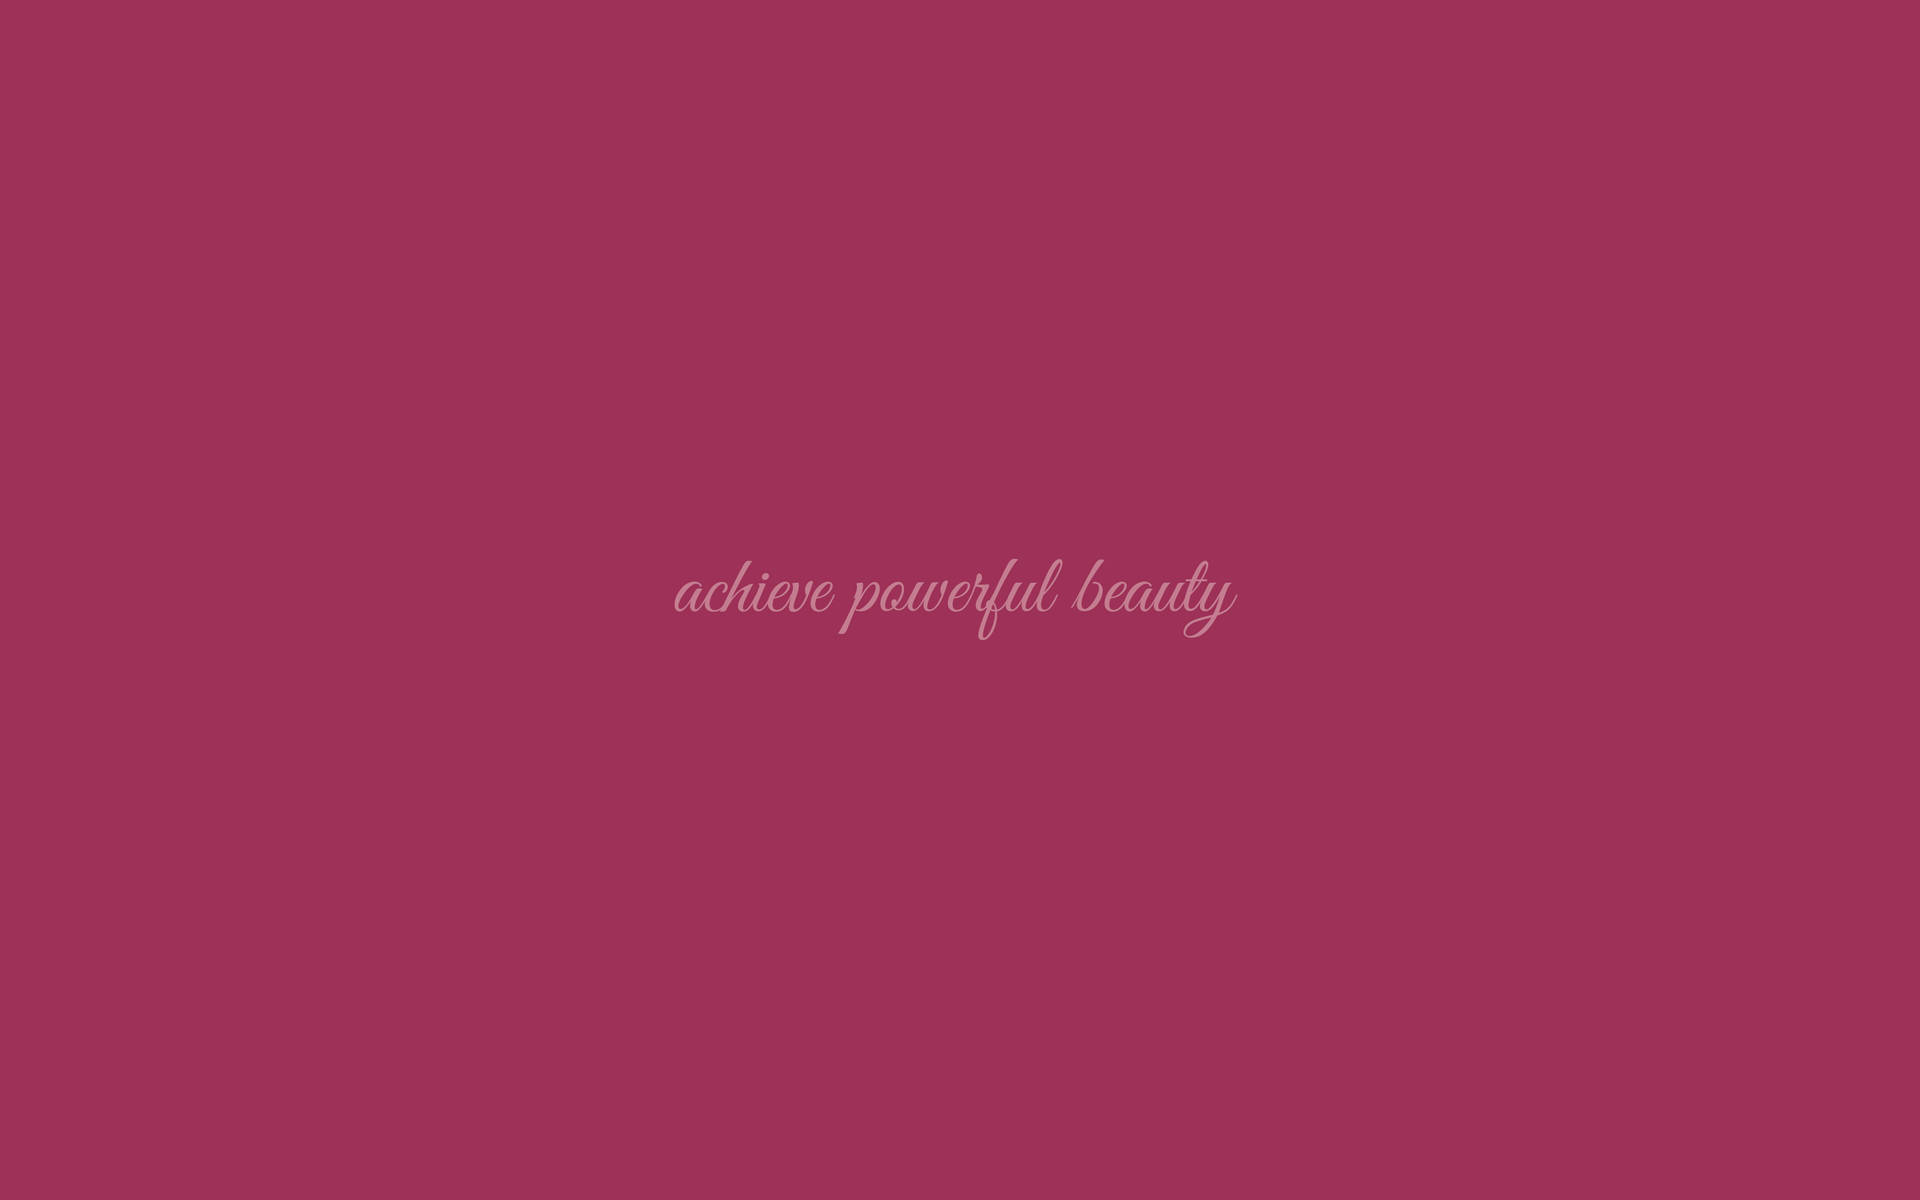 Baddie Beauty Quote Background